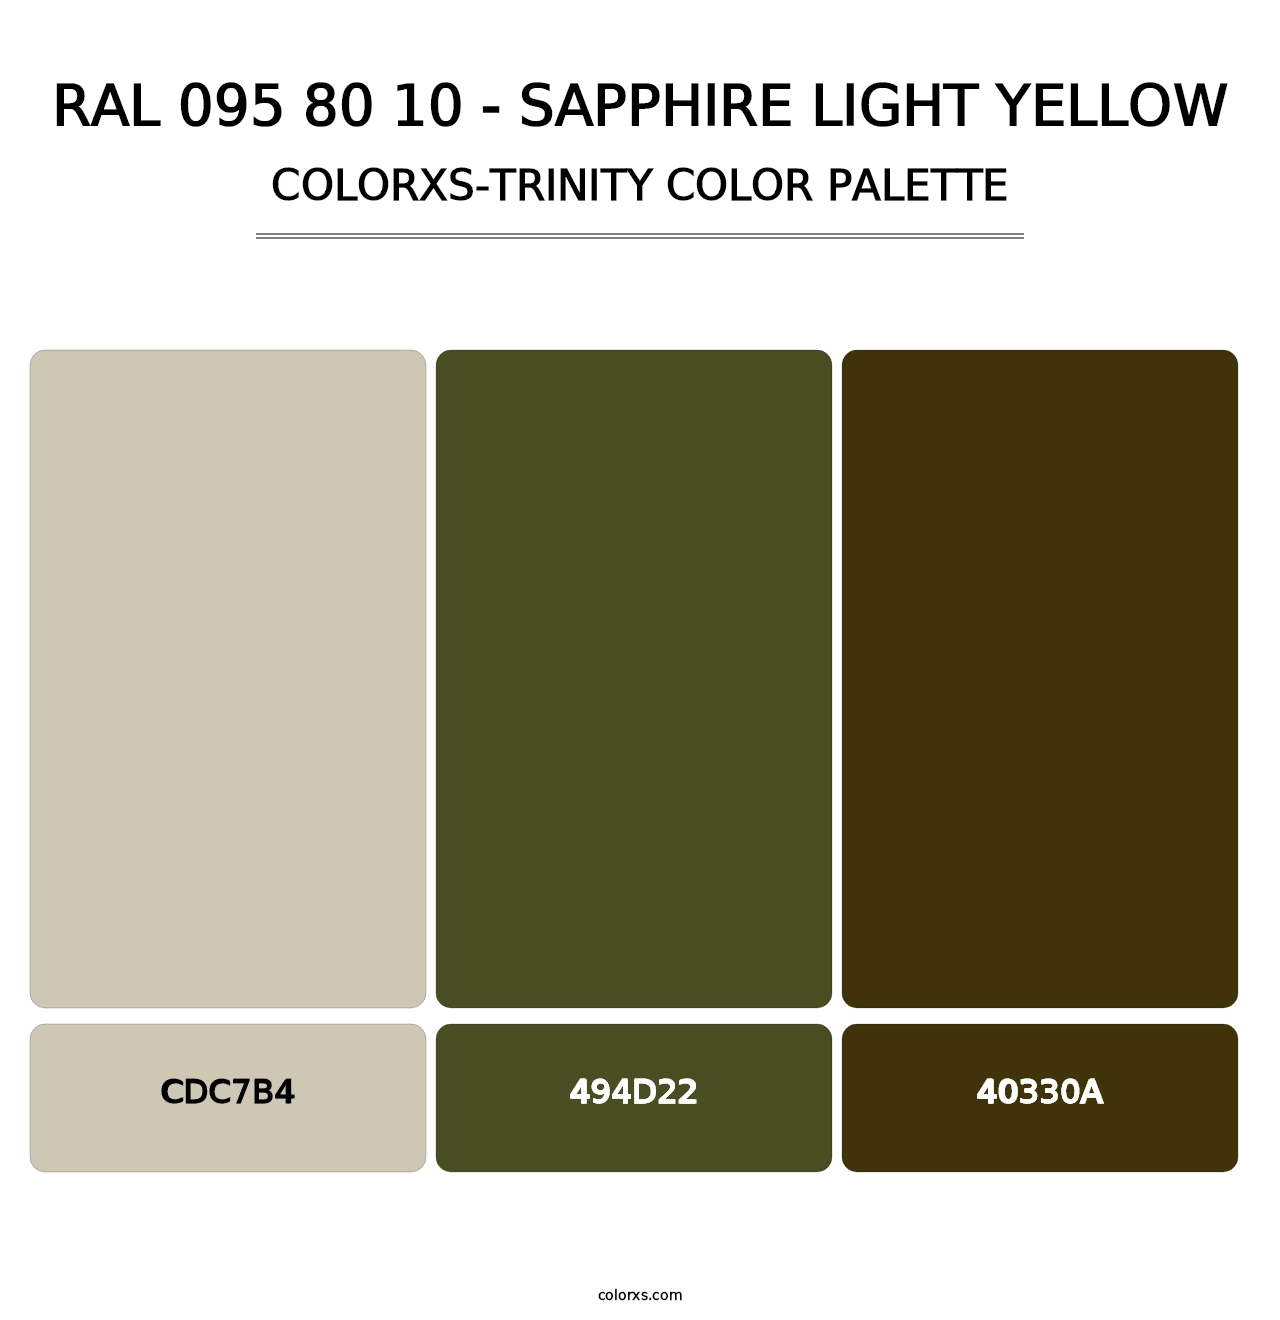 RAL 095 80 10 - Sapphire Light Yellow - Colorxs Trinity Palette